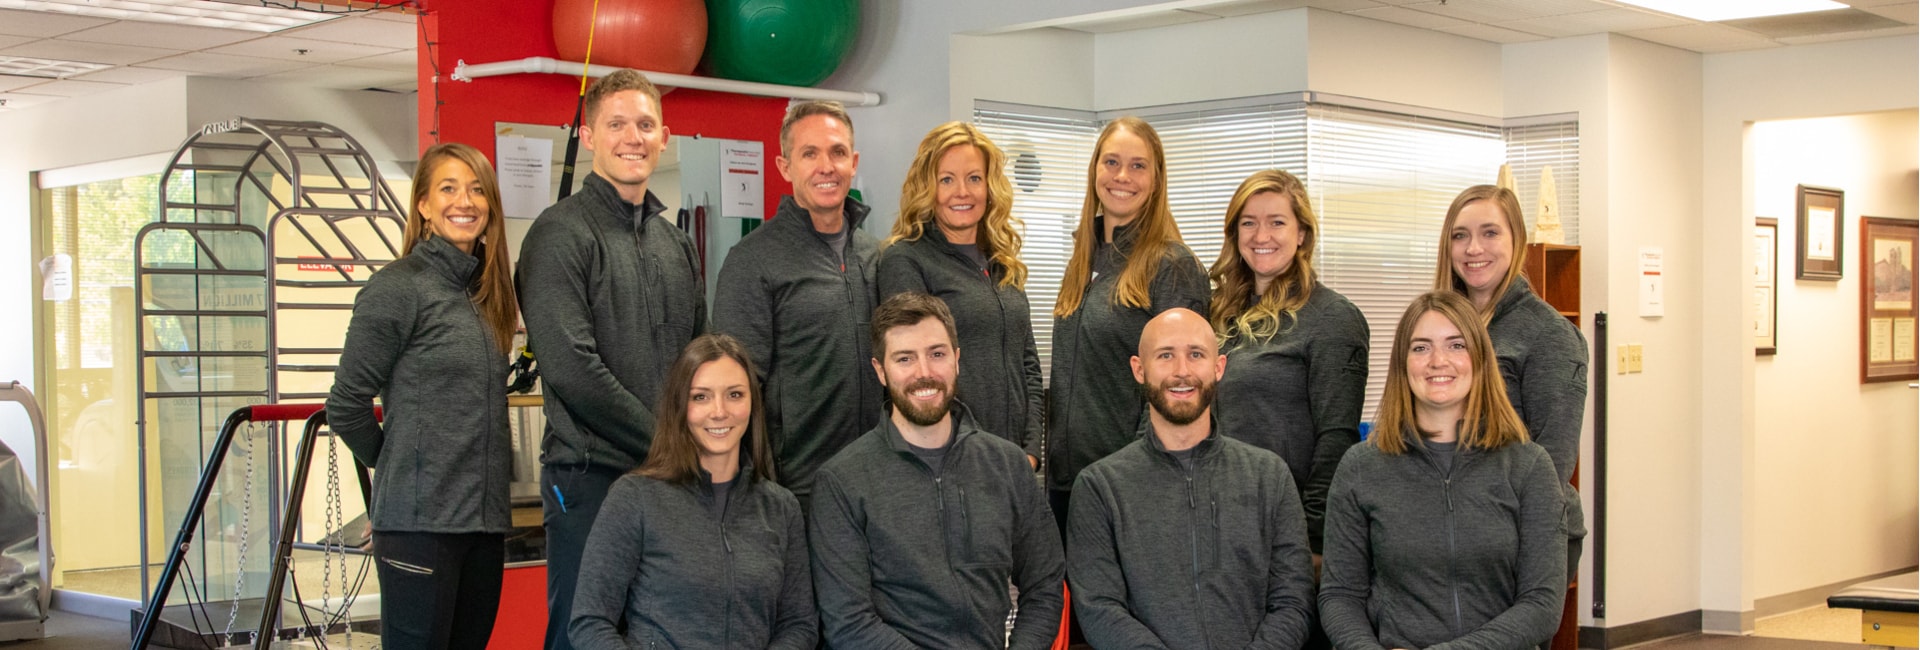 Team shot - Therapeutic Associates Physical Therapy - Boise State Street